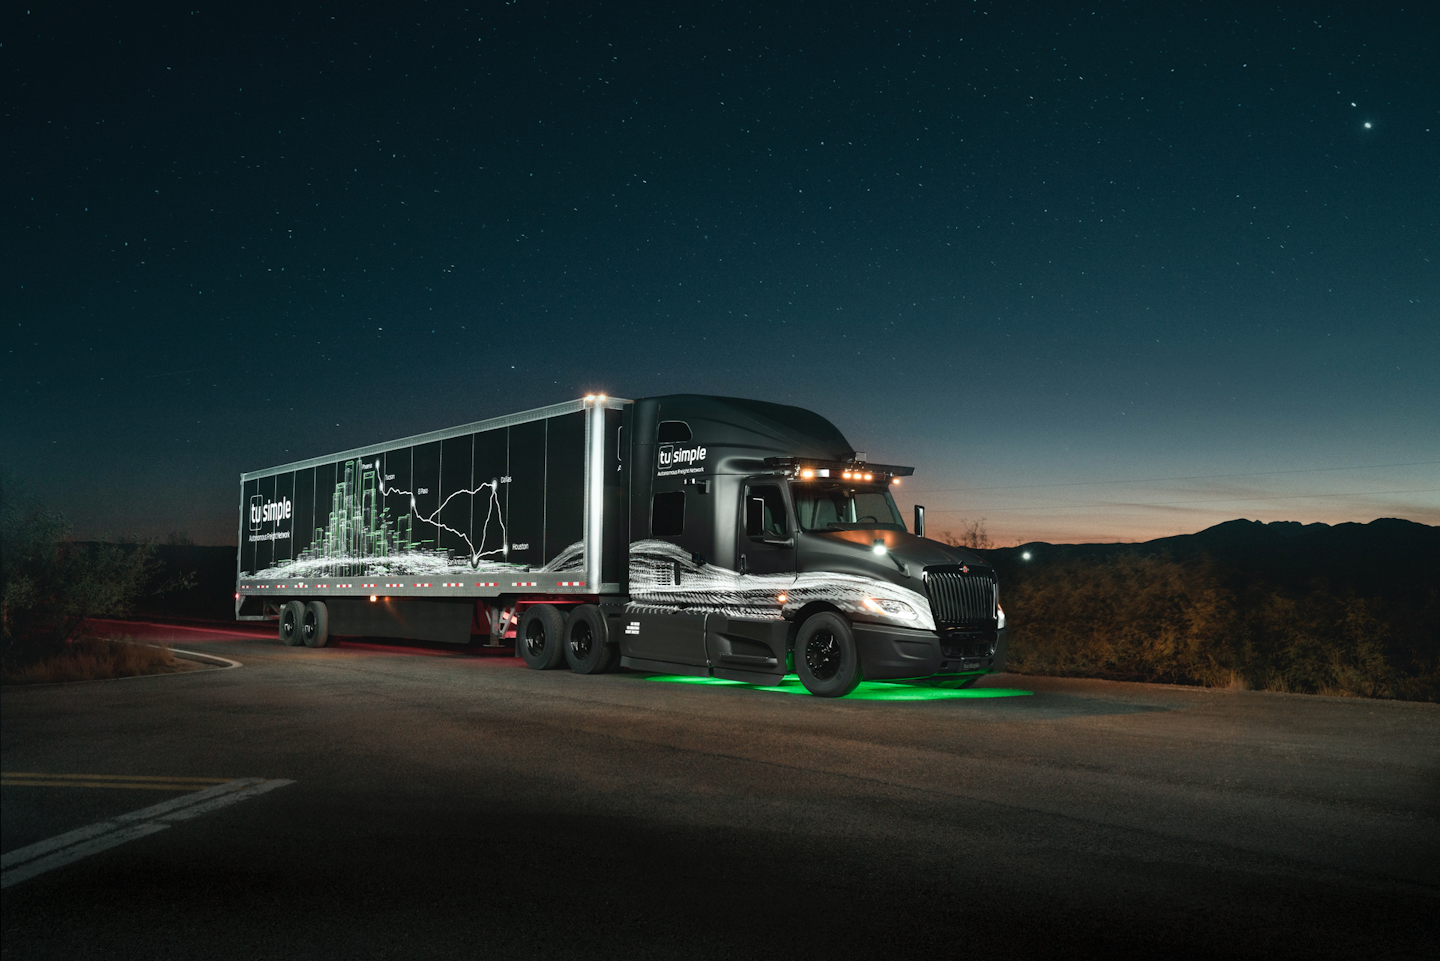 self driving truck animation at night